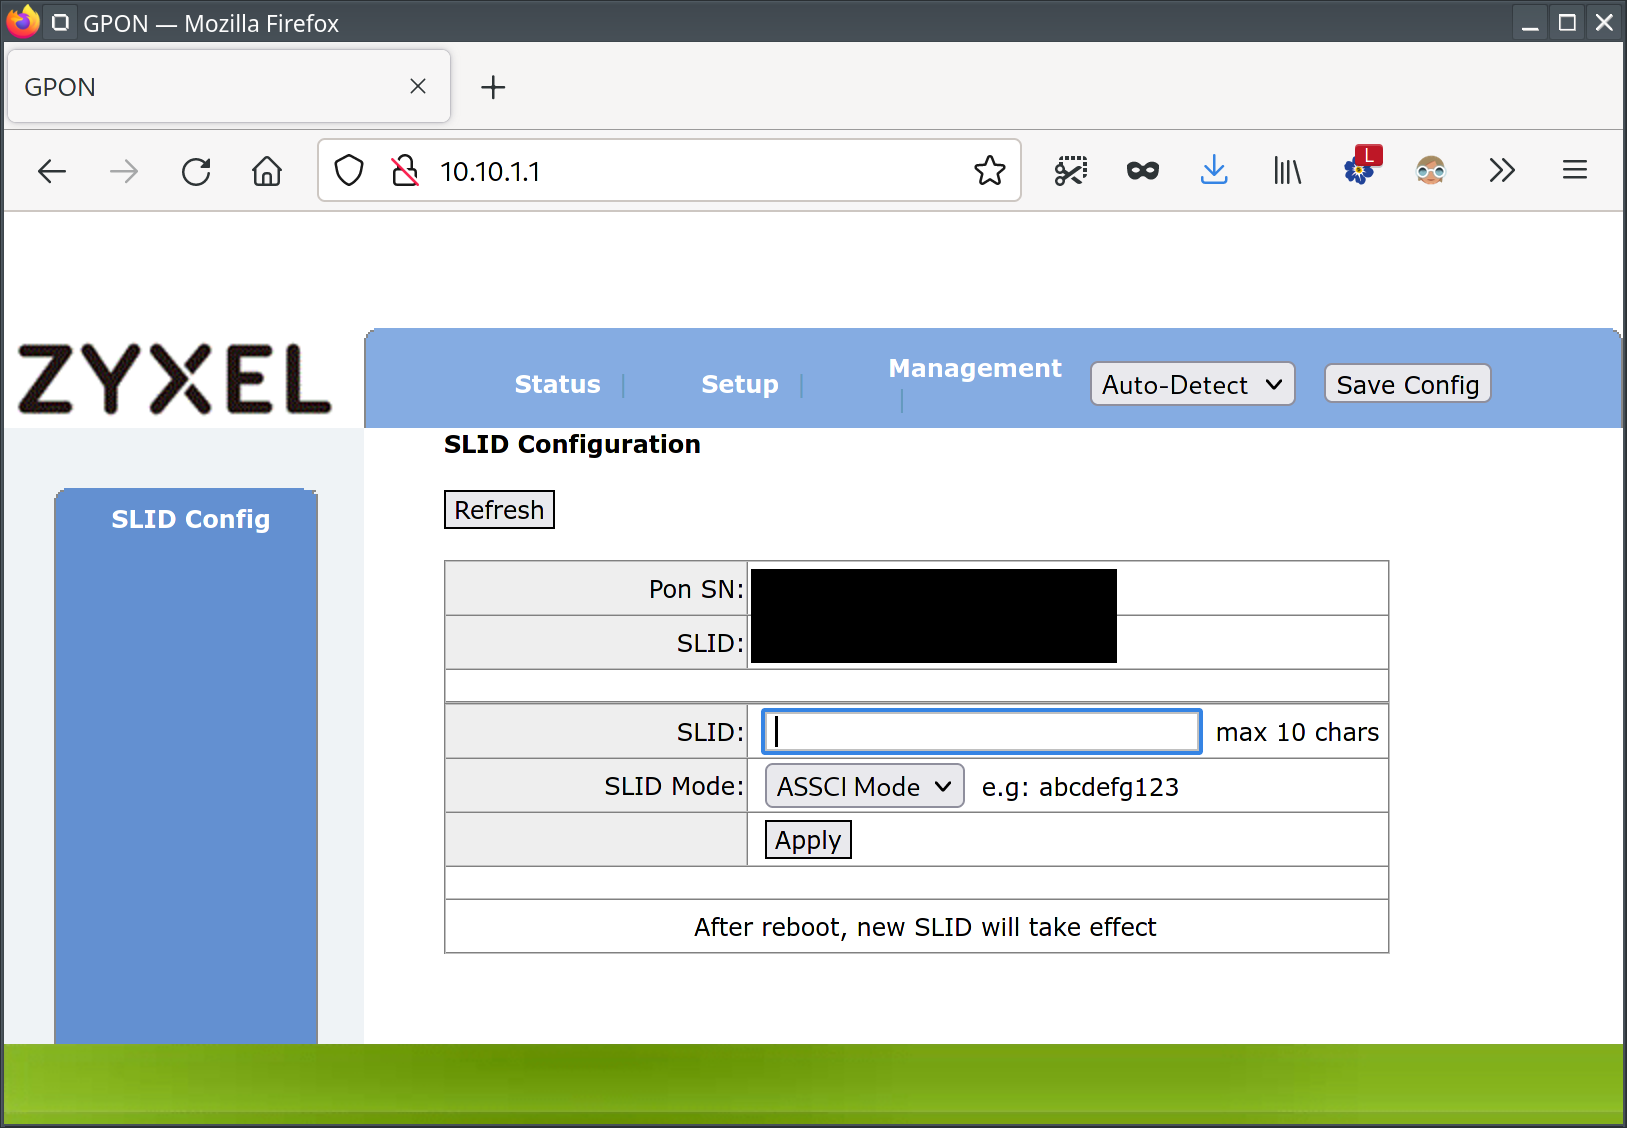 The SFP ONU configuration web interface shows its SLID
        configuration page. A text field labelled SLID asks the user to enter a value of at most ten characters. As
        an example, abcdefg123 is listed.